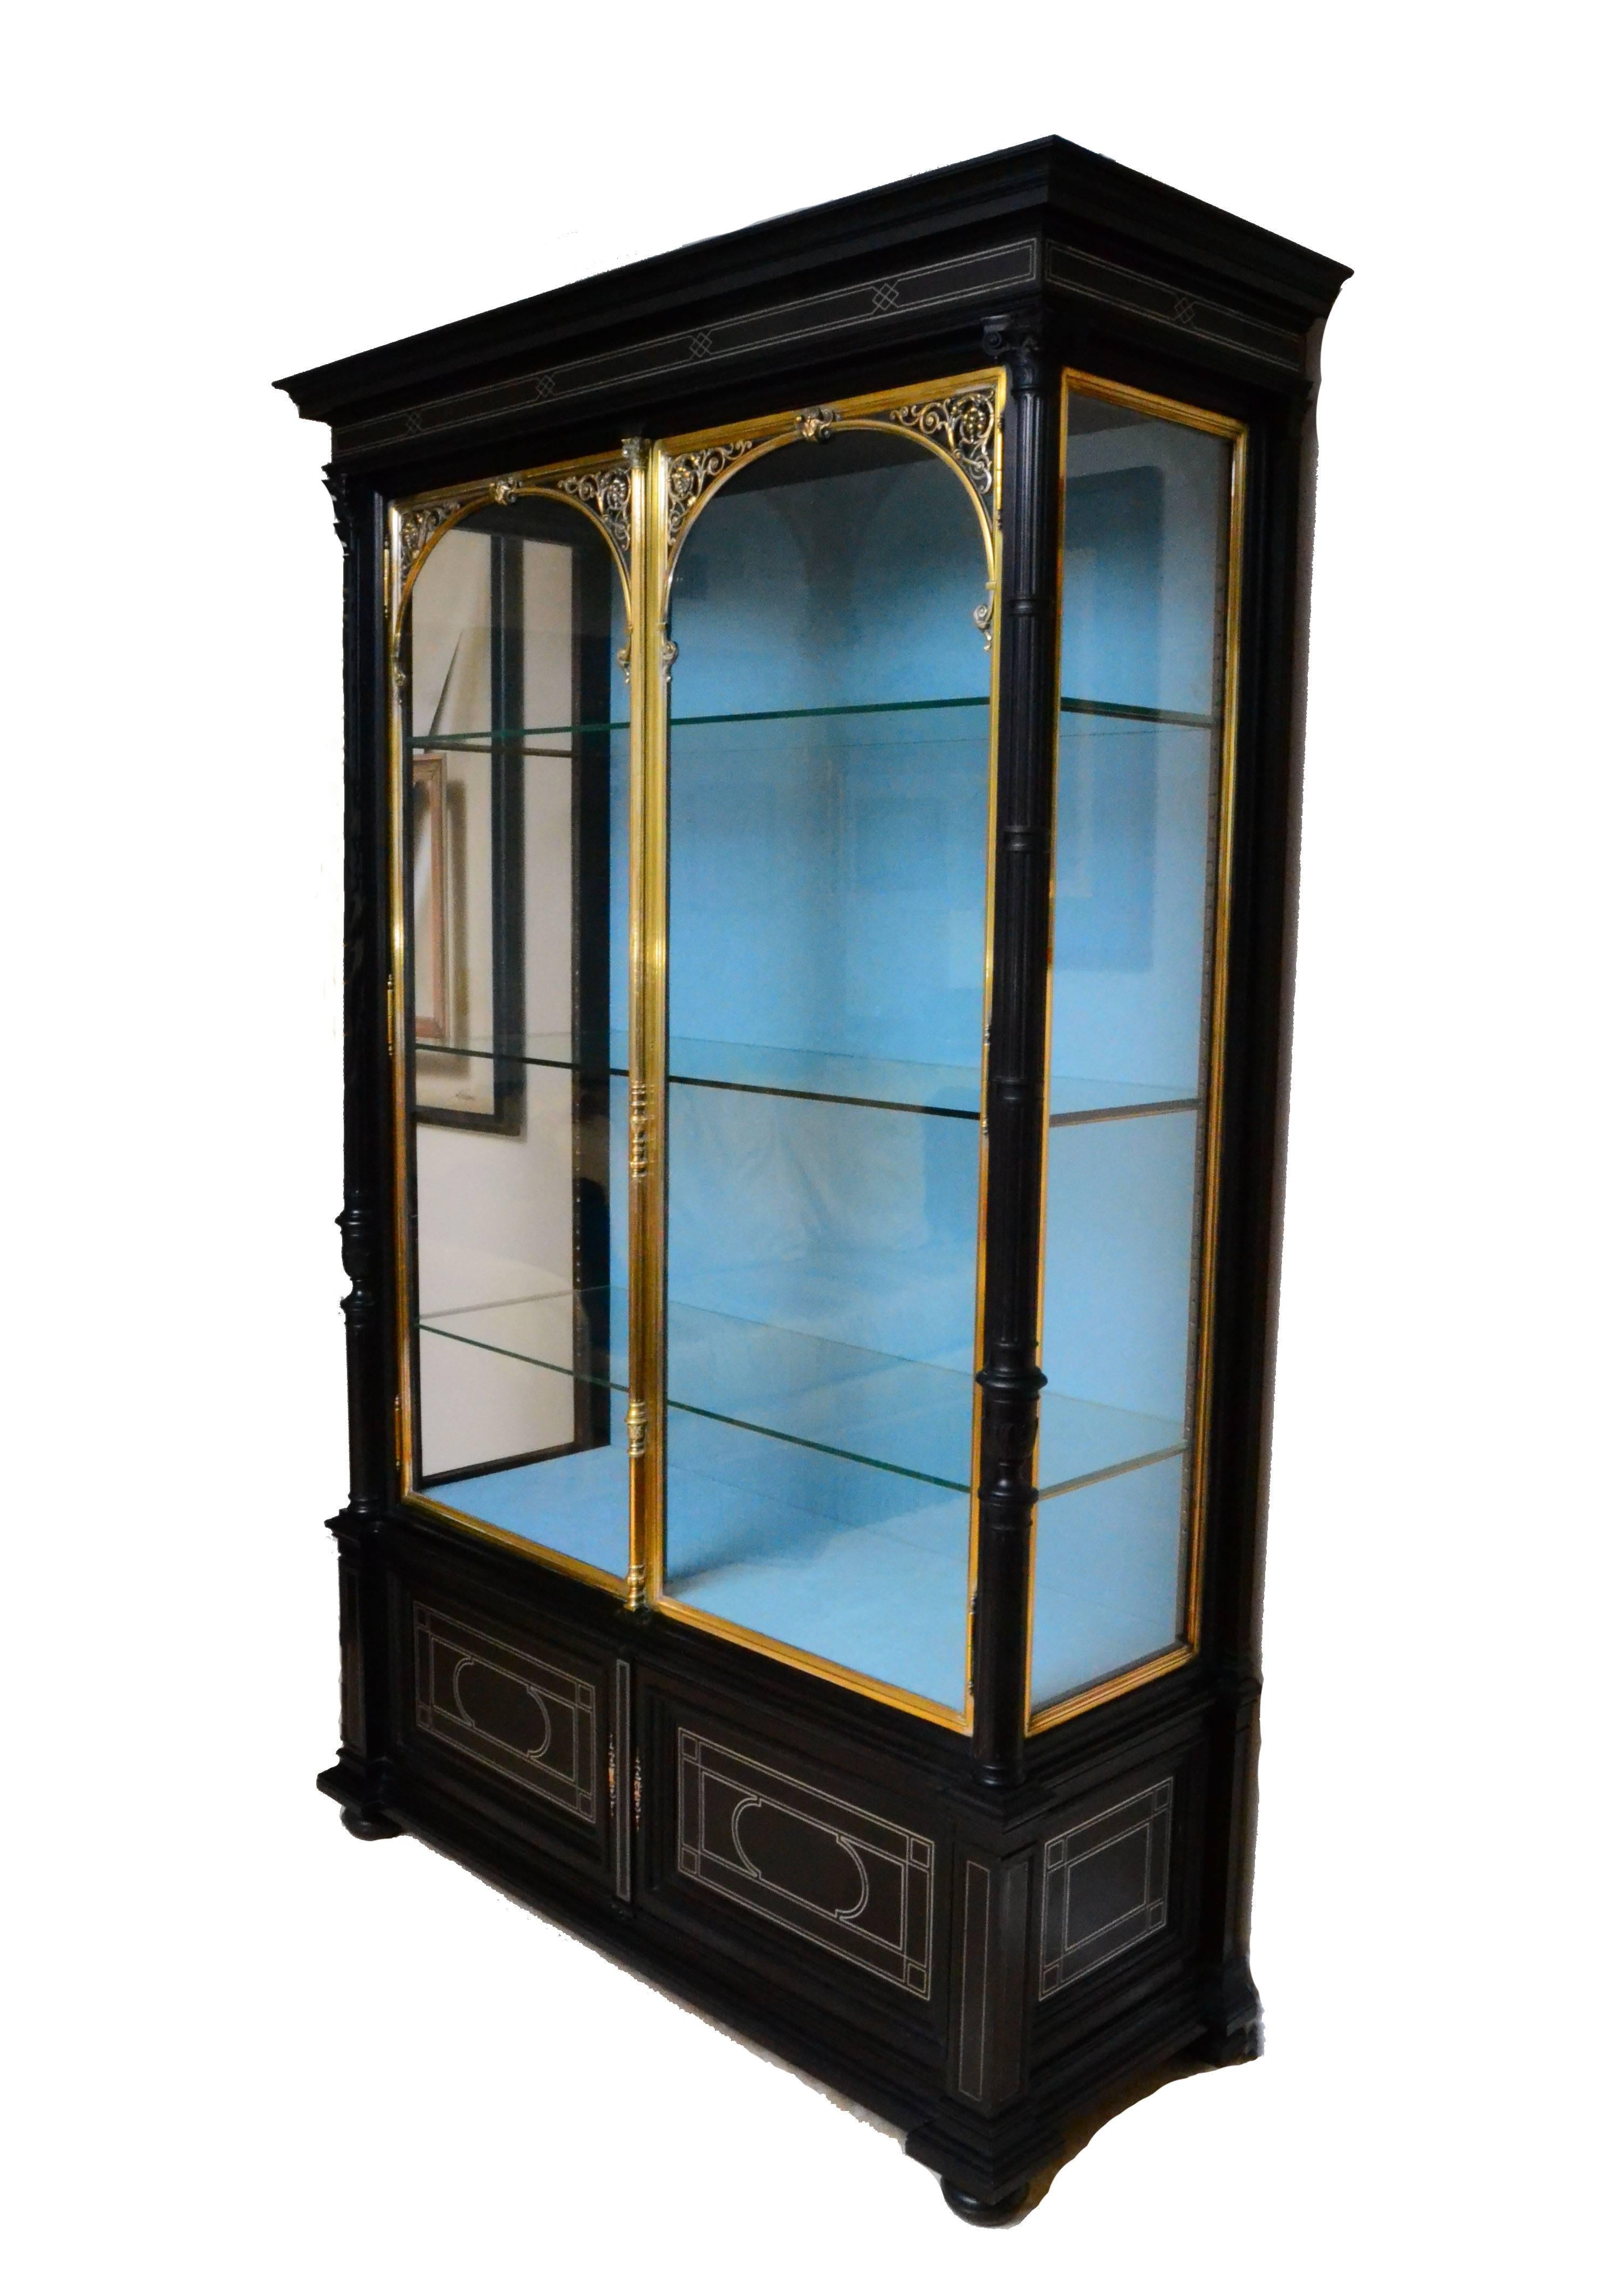 19th century ebonized vitrine. Side panelled glass set in brass frames. Fronted with a pair of glass doors also set in decorative brass frames. Key hole set in an elaborately turned escutcheon. Panelling on the front and side finished with brass